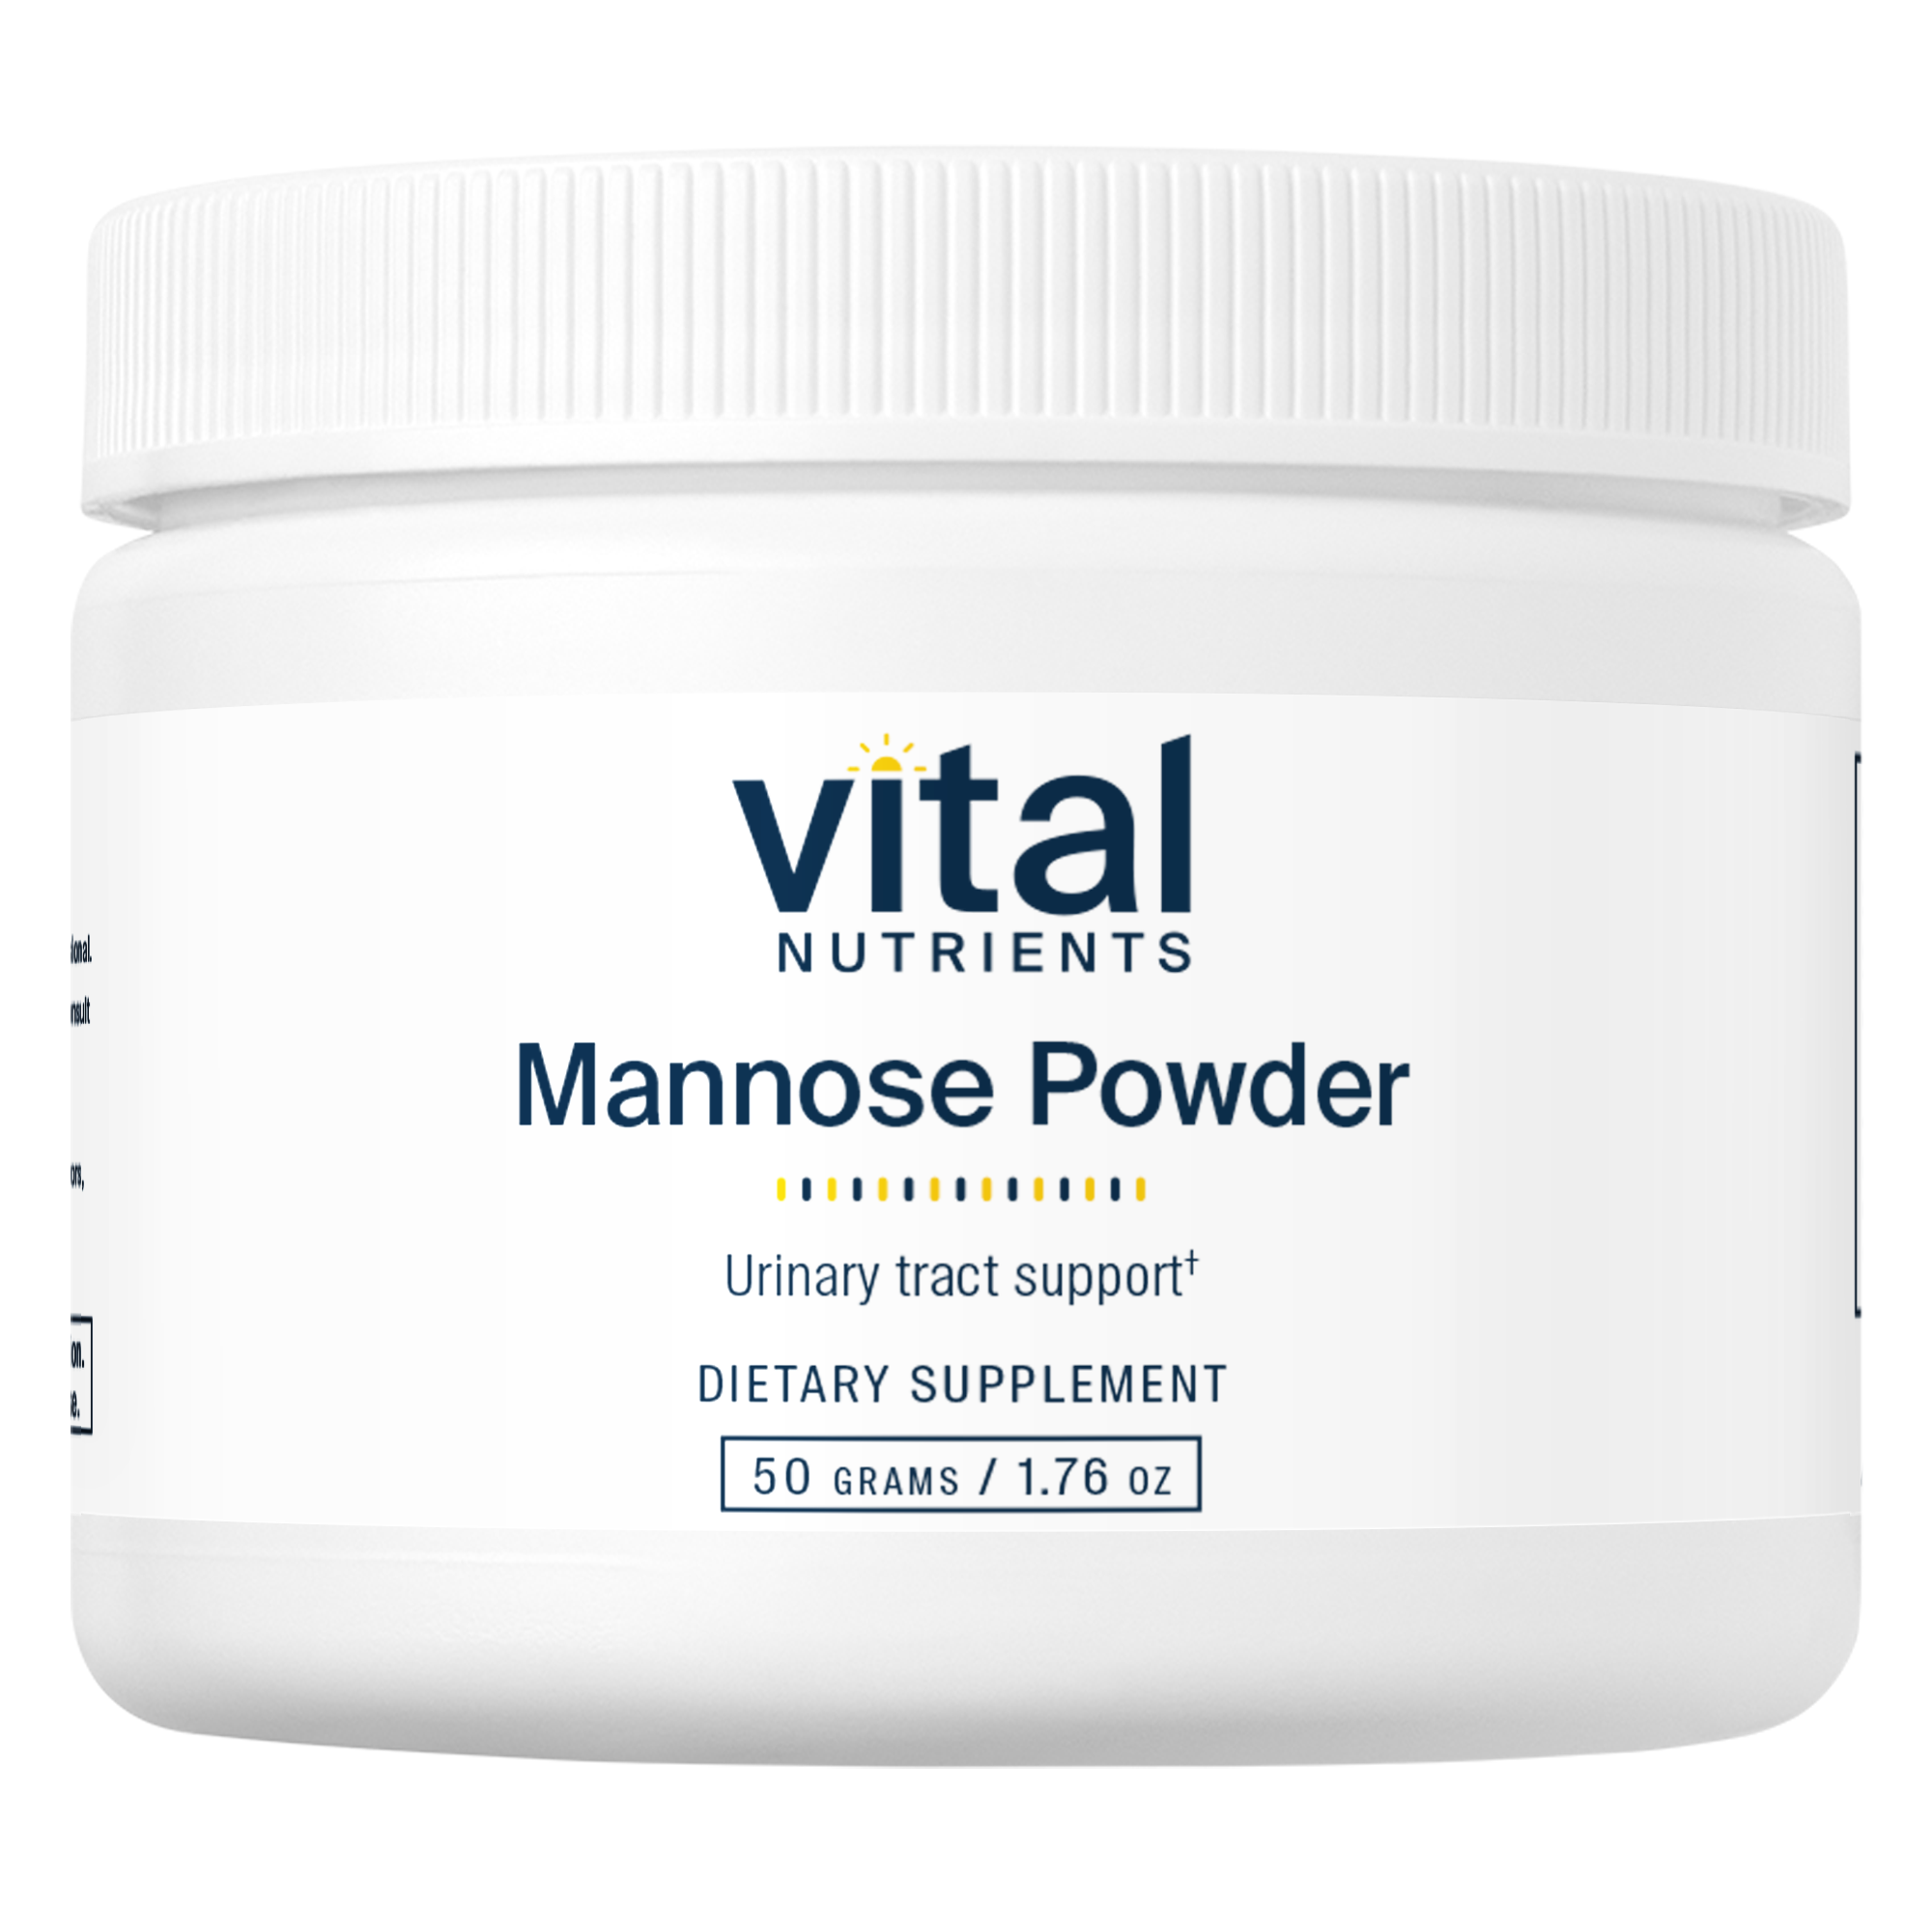 Mannose Powder (Urinary Tract Support)